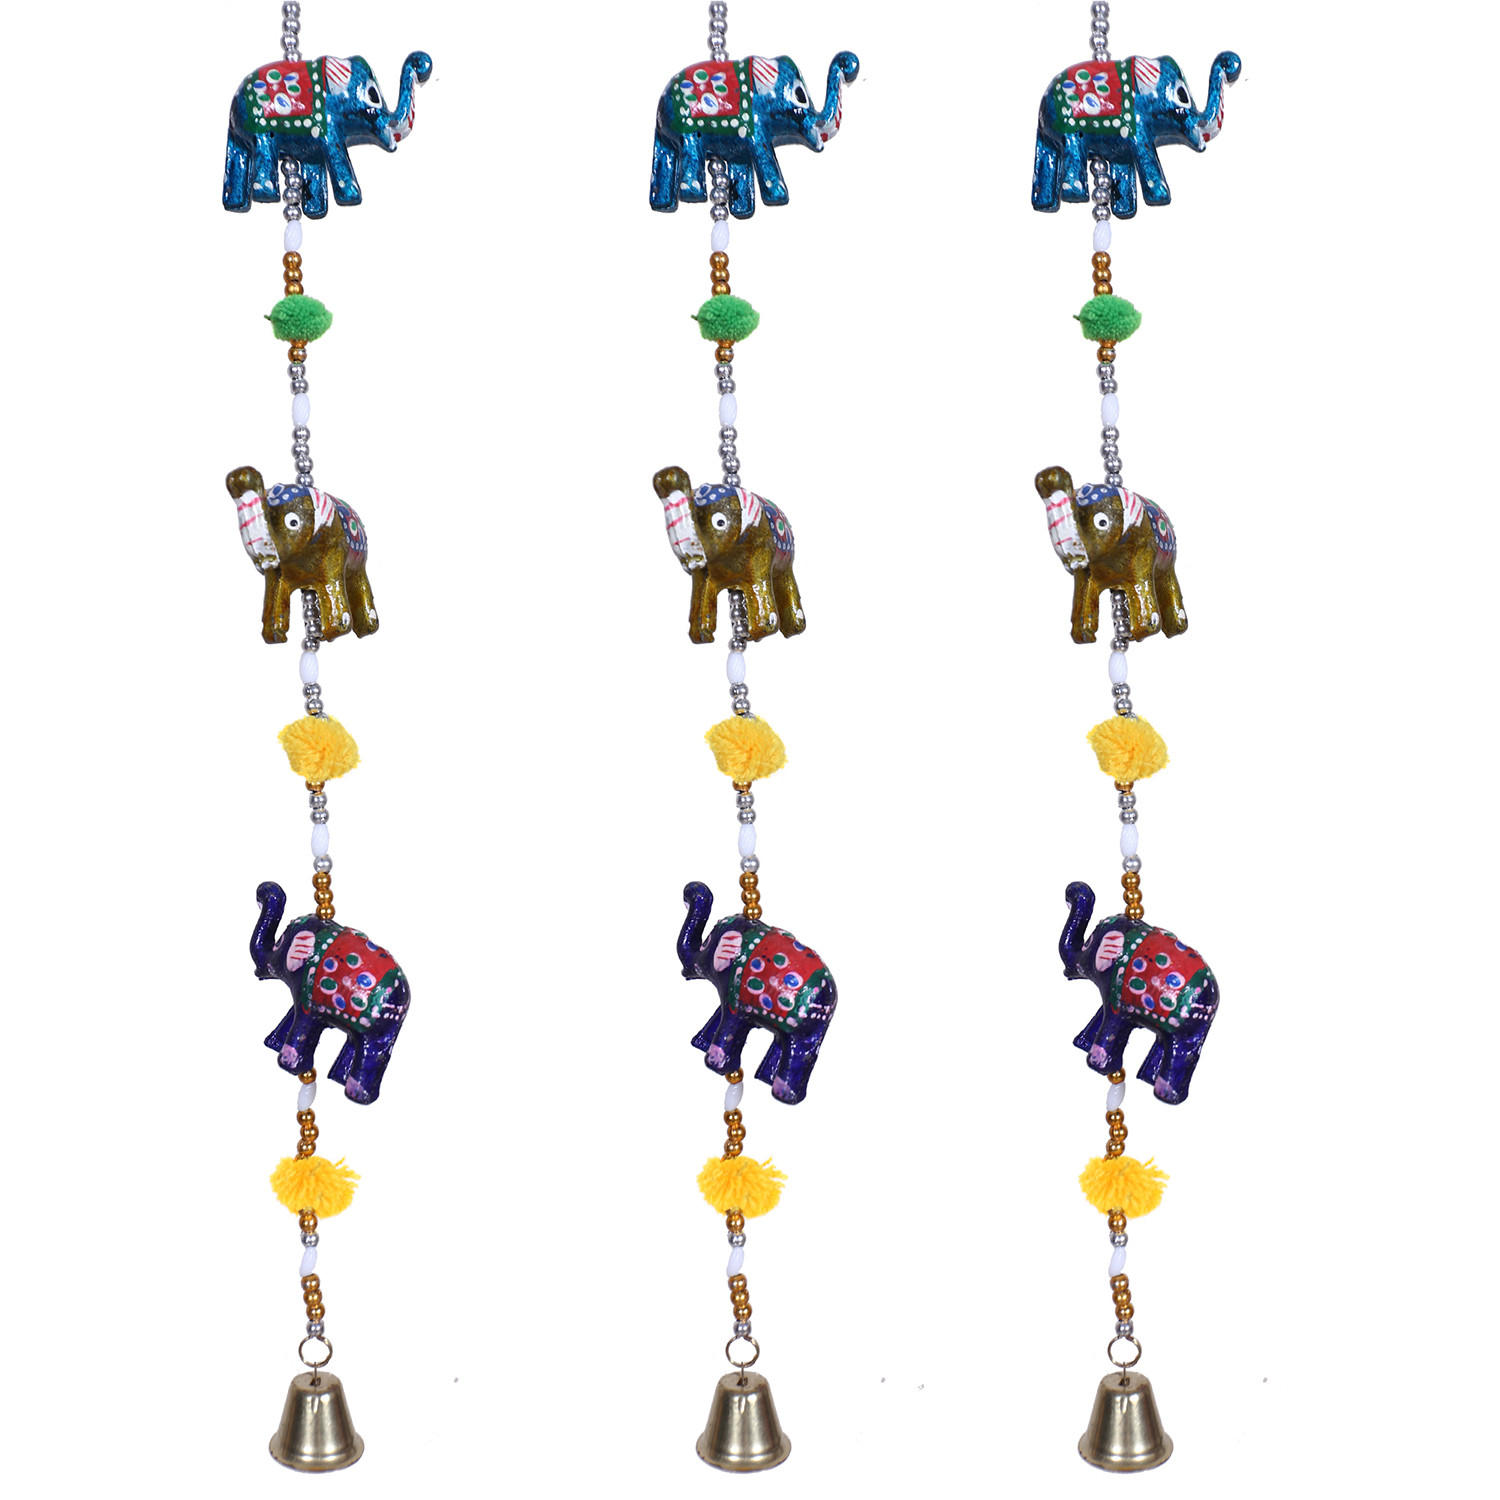 Kuber Industries Handcrafted Elephant Door Latkan with Bells|Rajasthani Traditional Hanging Windchimes Pair For Home Decoration (Multicolor)